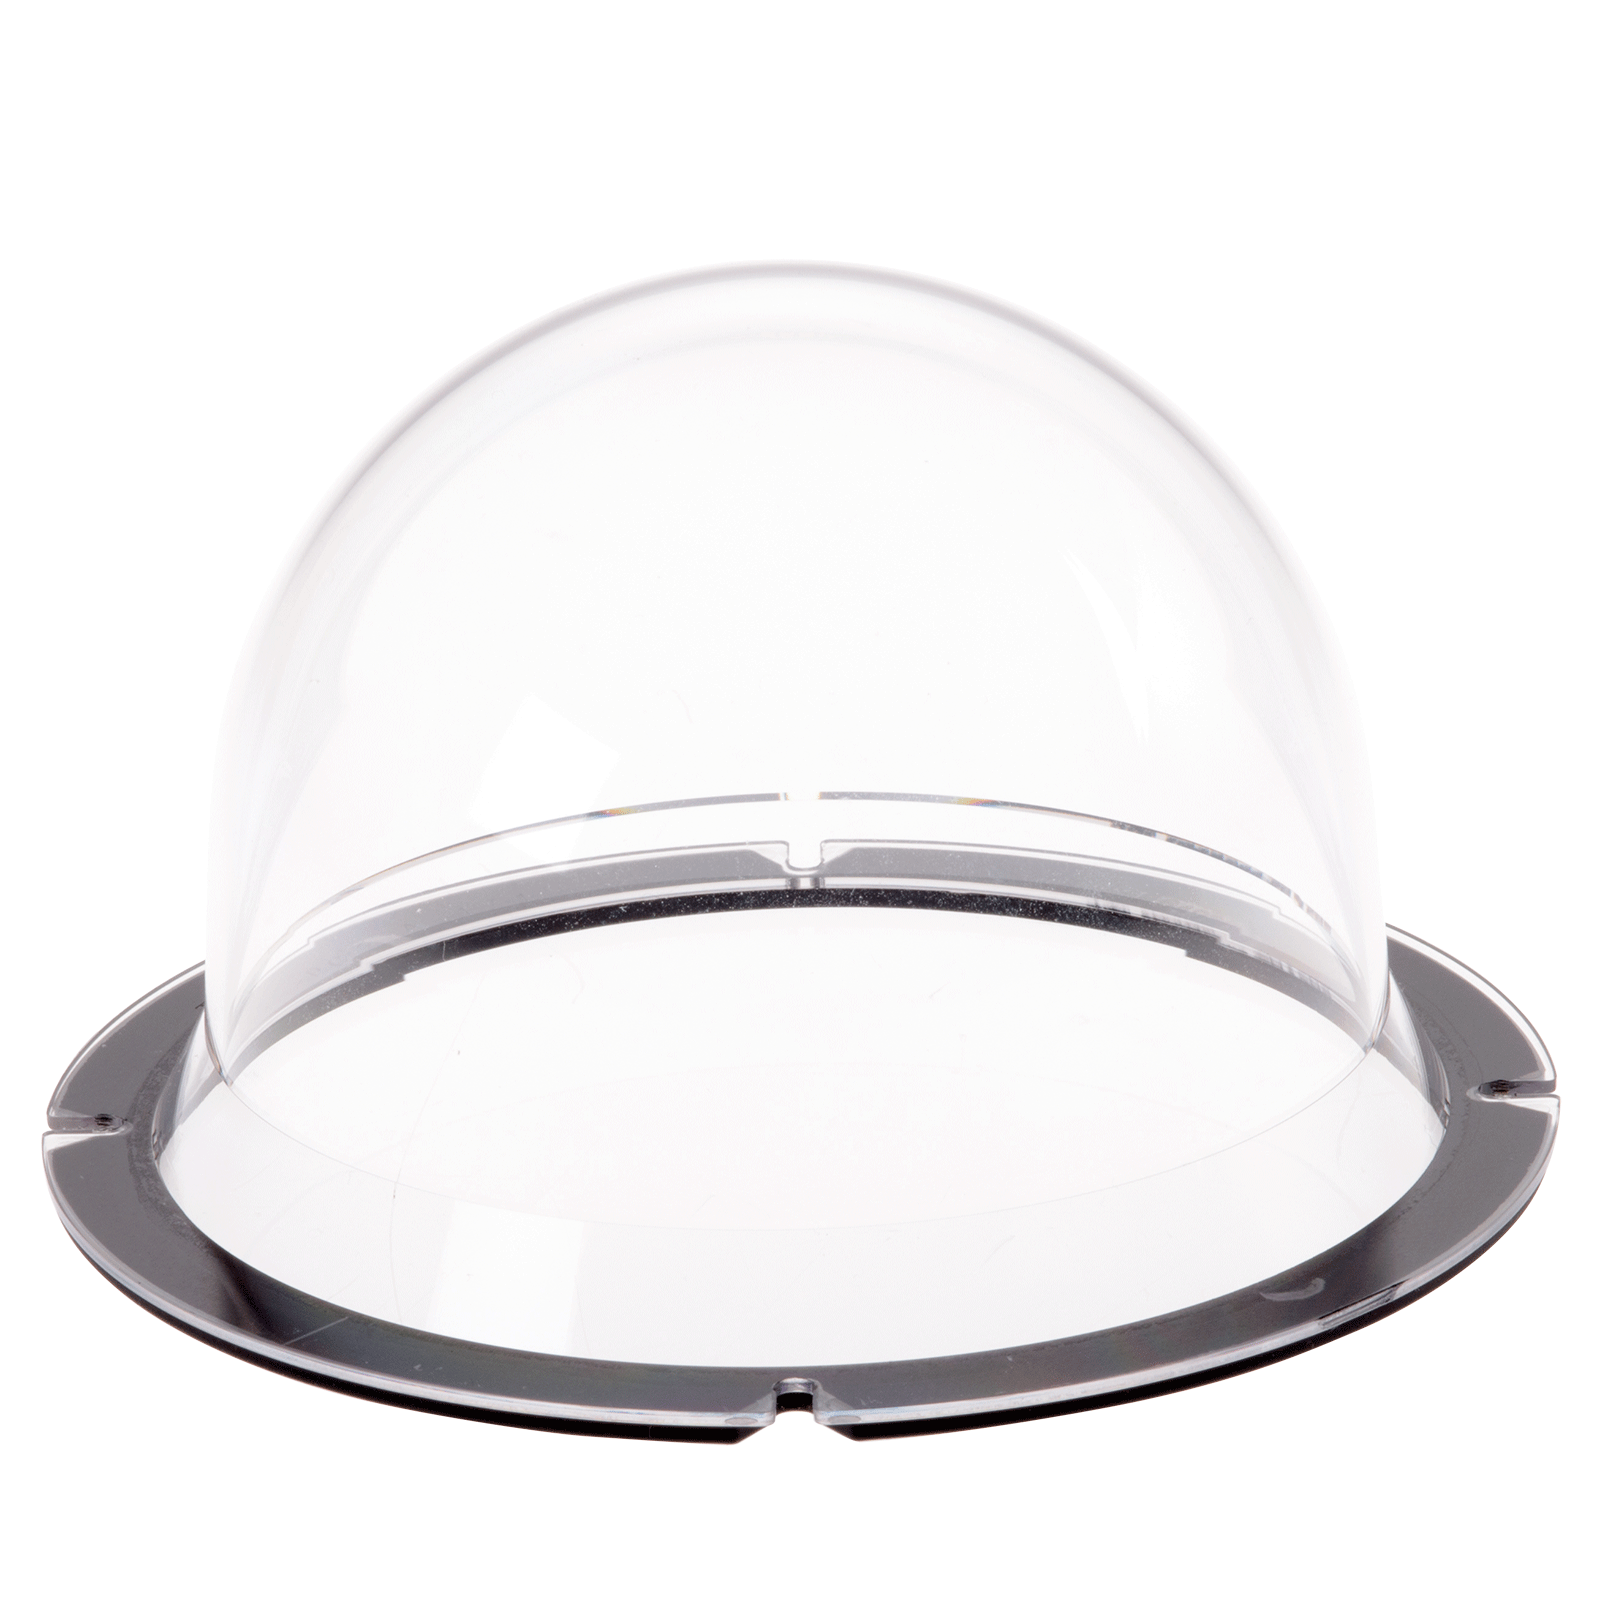 Axis 01607-001 M55 Smoked Dome in Polycarbonate